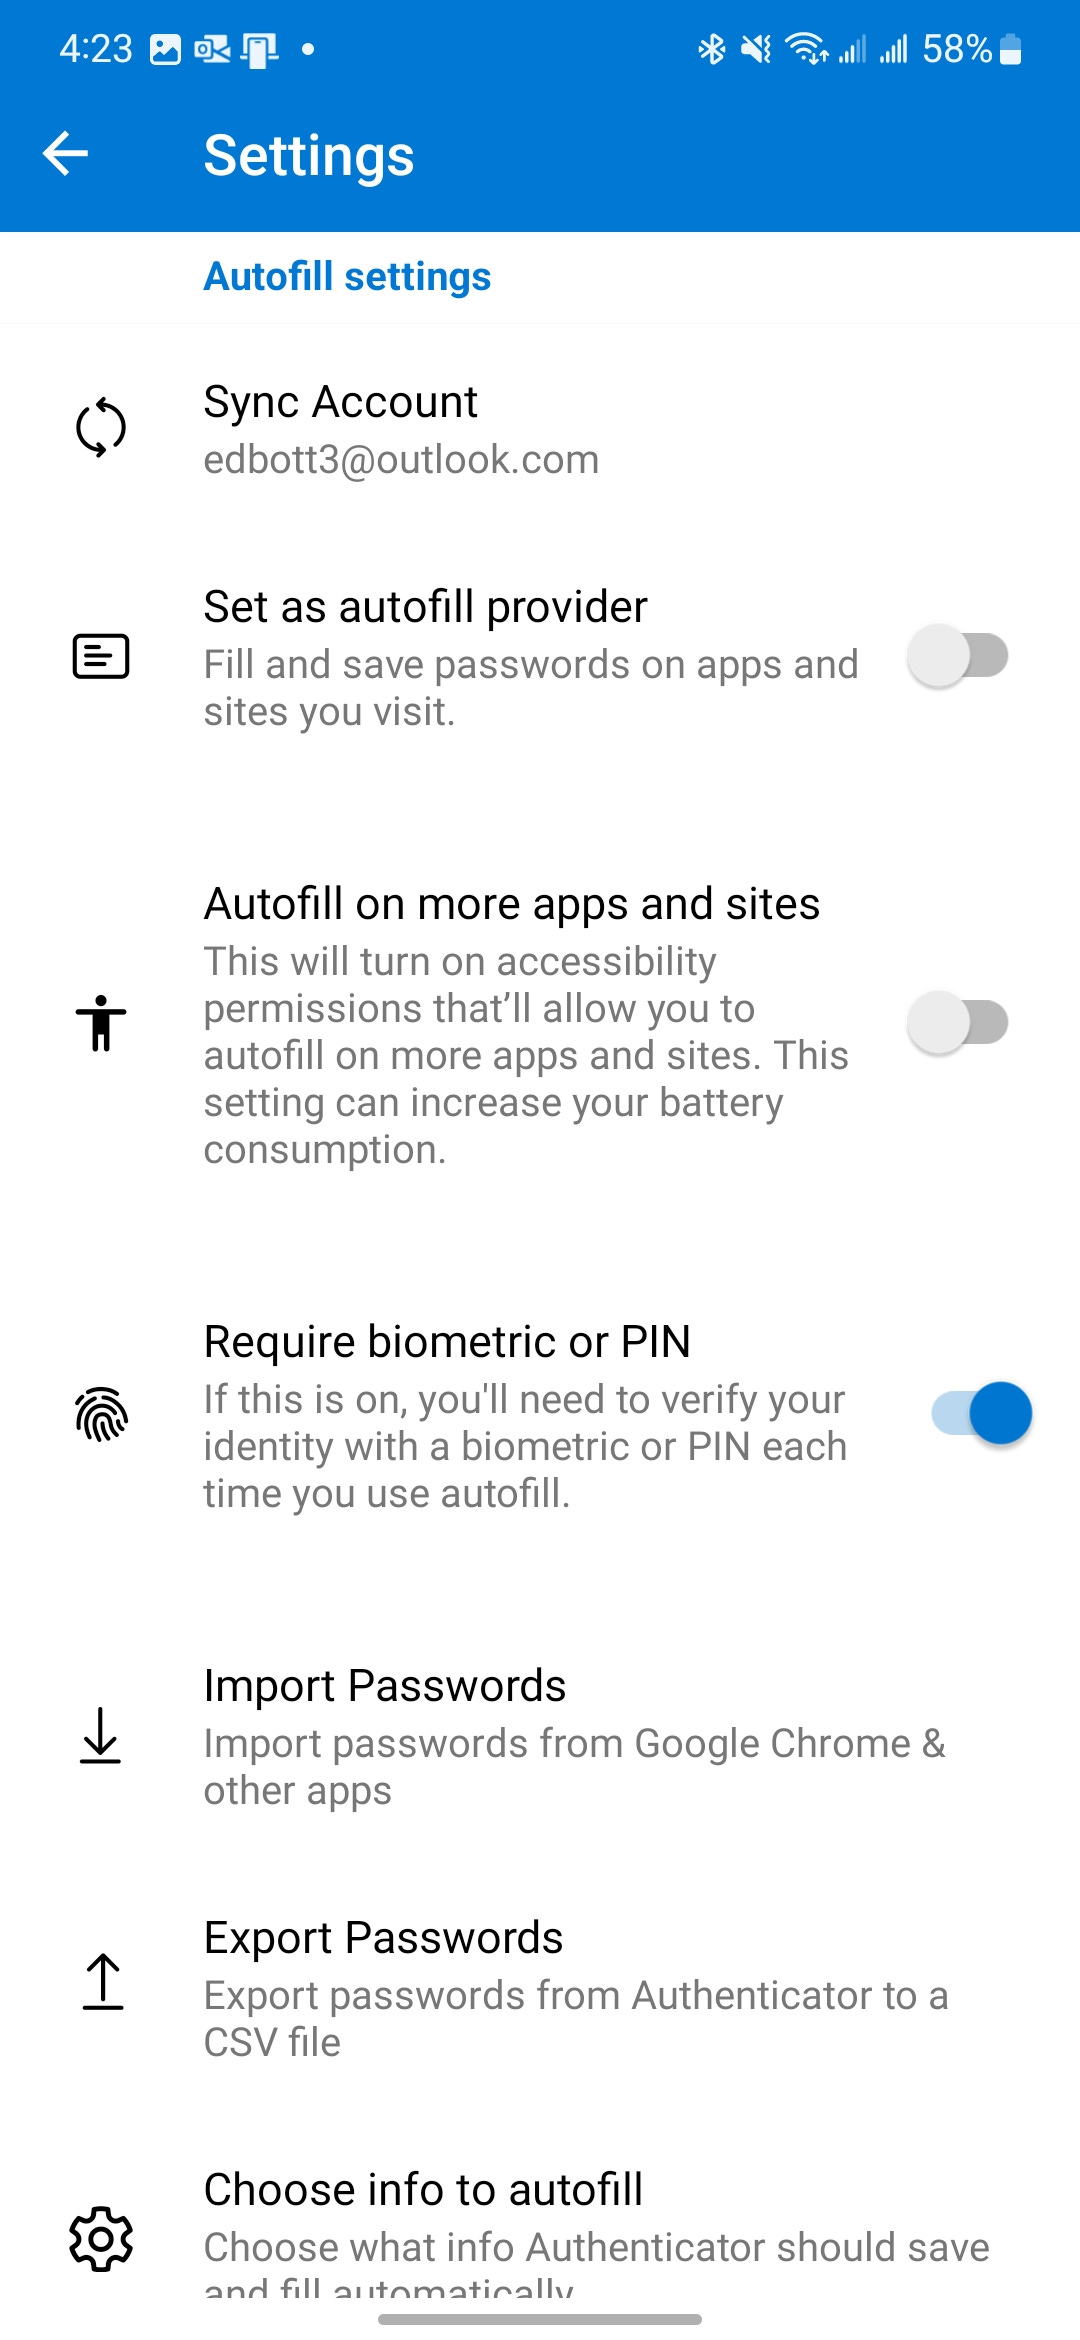 This is a screenshot of the Settings page from Microsoft Authenticator, with options for syning passwords and automatically filling them in and saving them for use with apps and wensites.